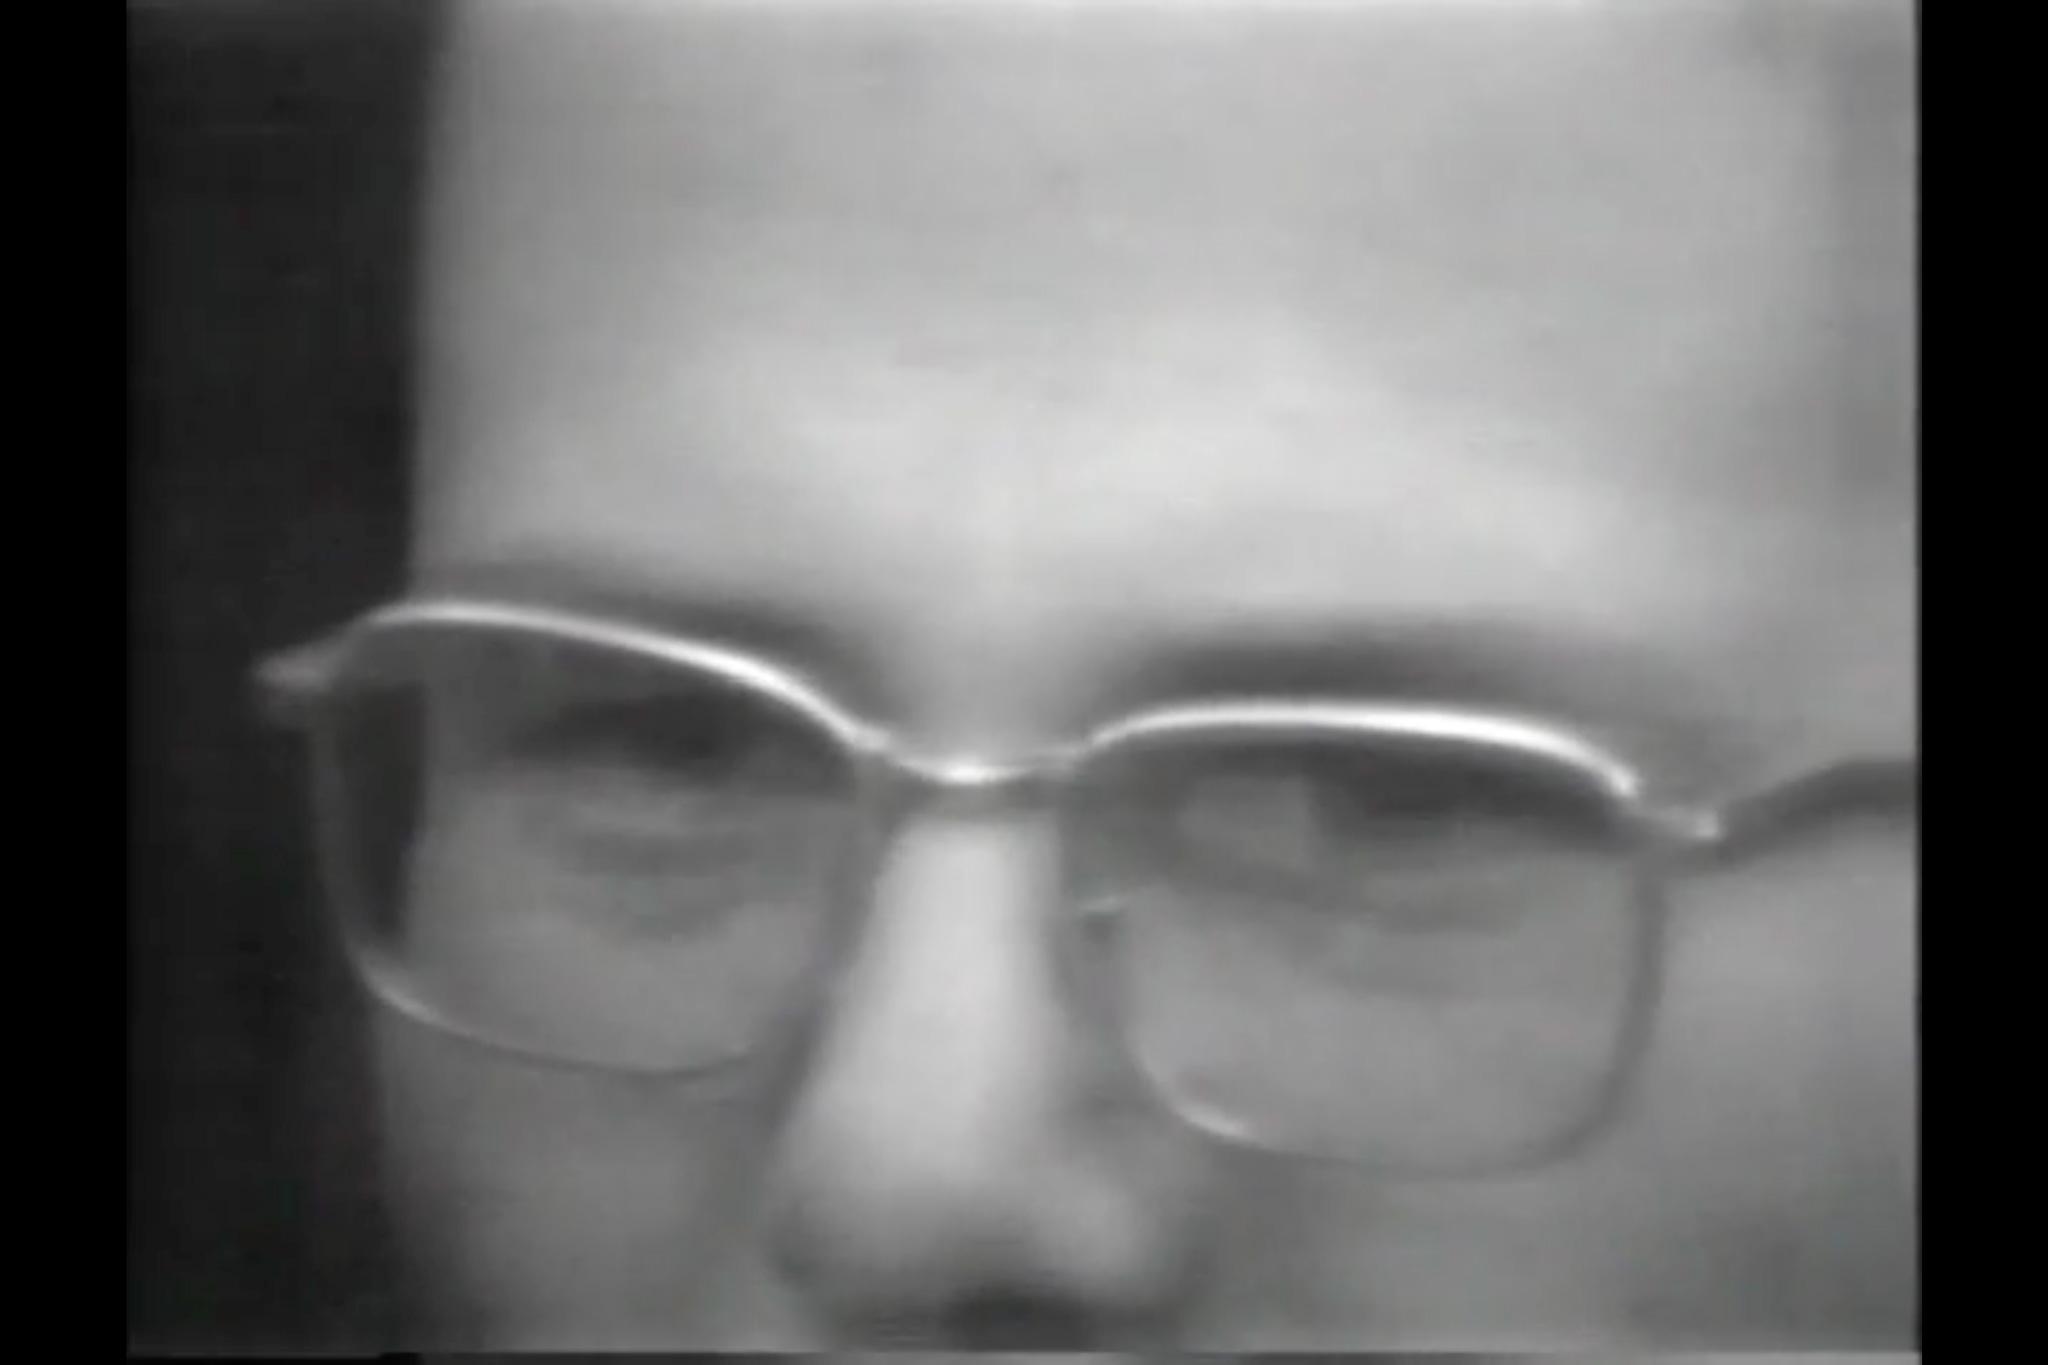 Black and white close-up image of a man with glasses.